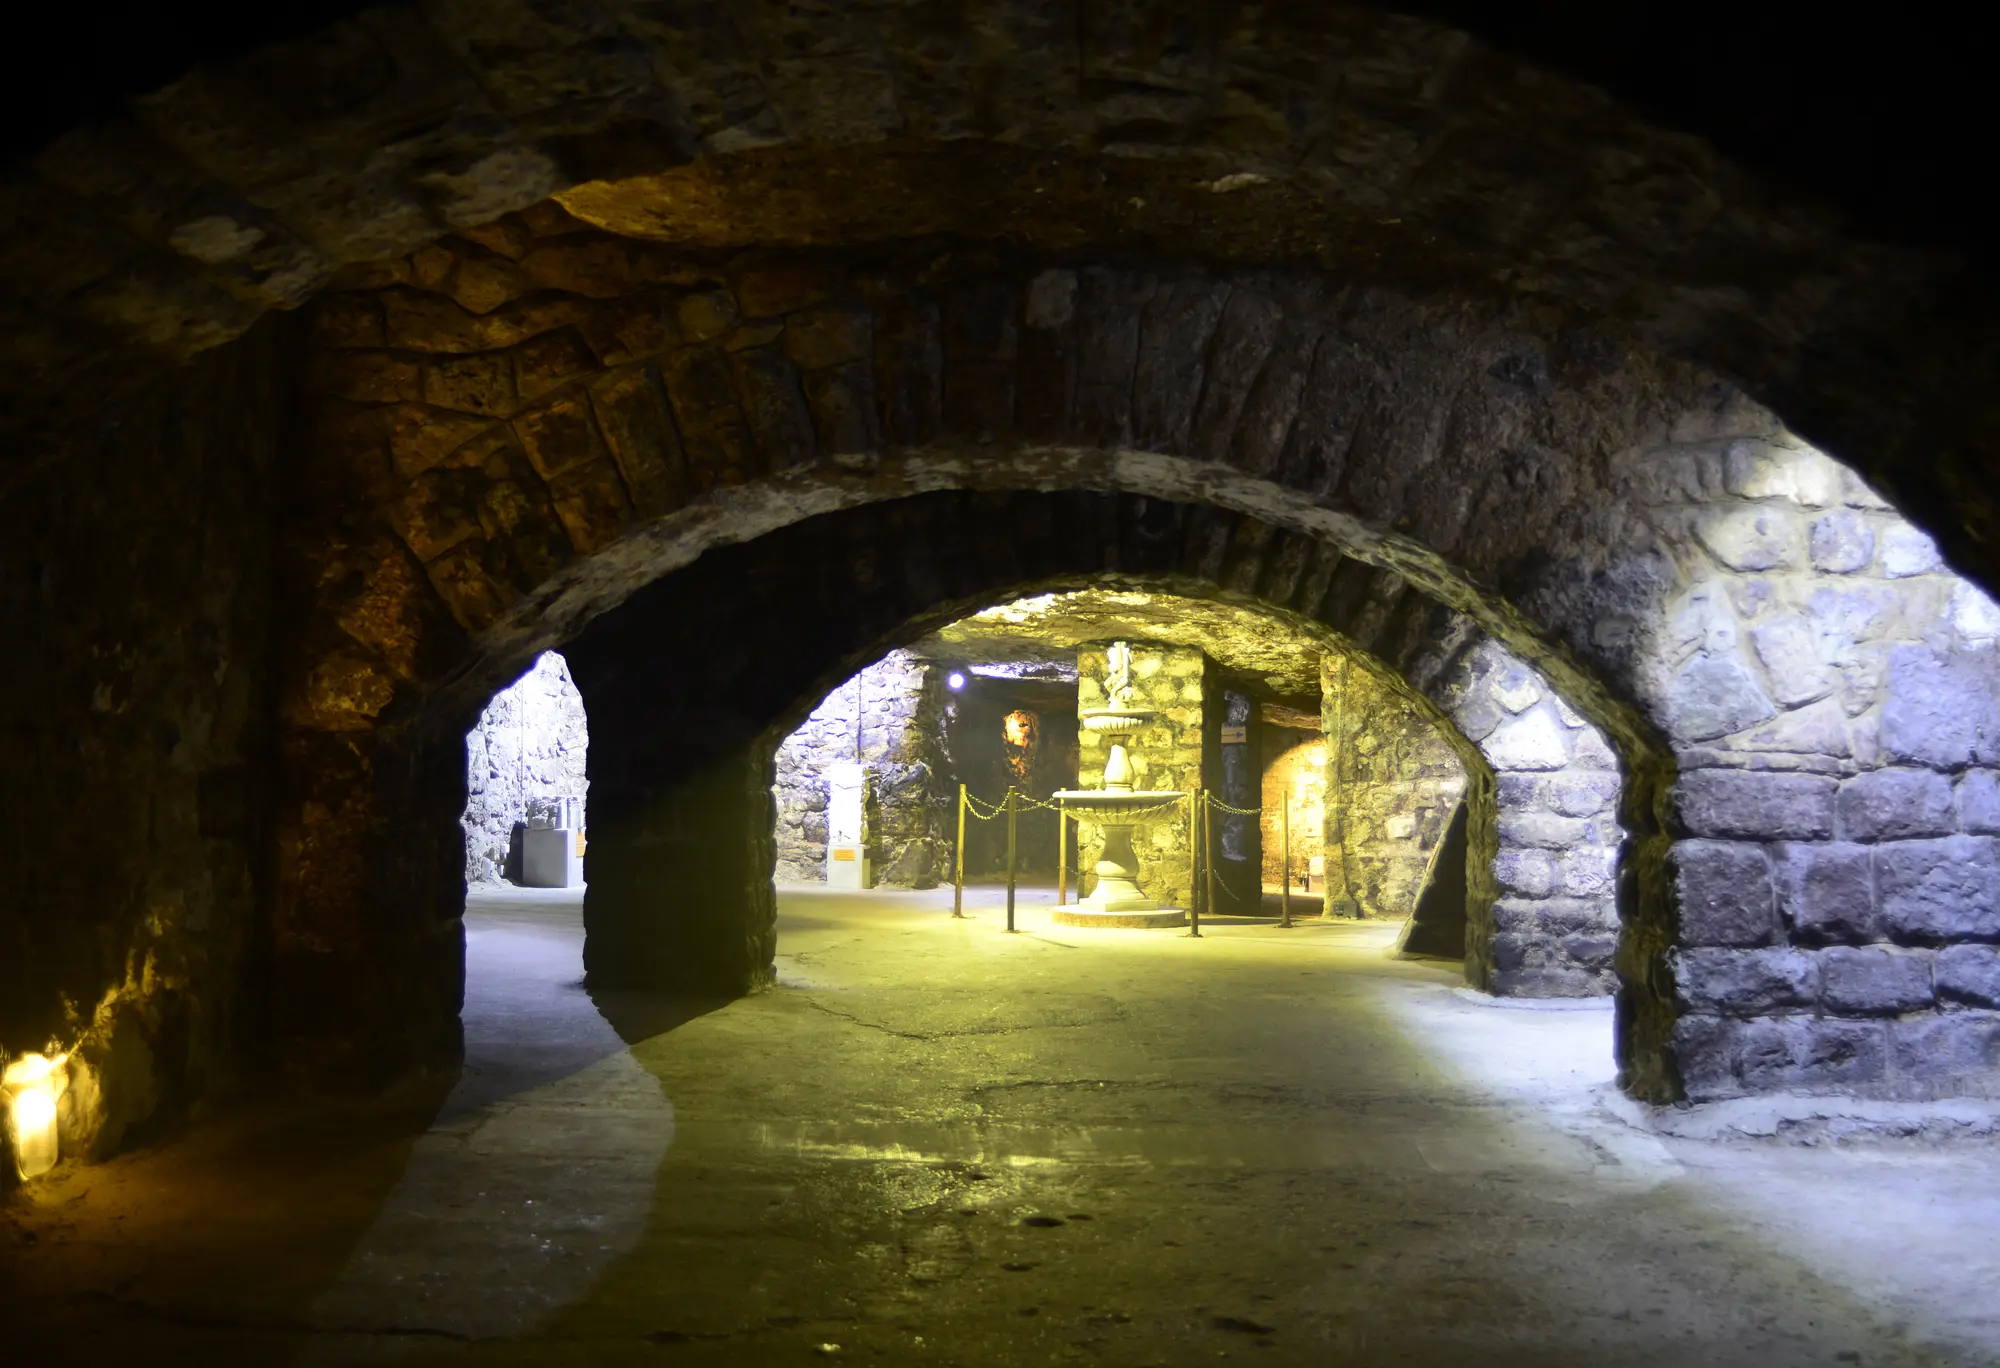 Stone arches over the walkways of the labyrinth under Buda Castle, a hidden gem in Budapest.